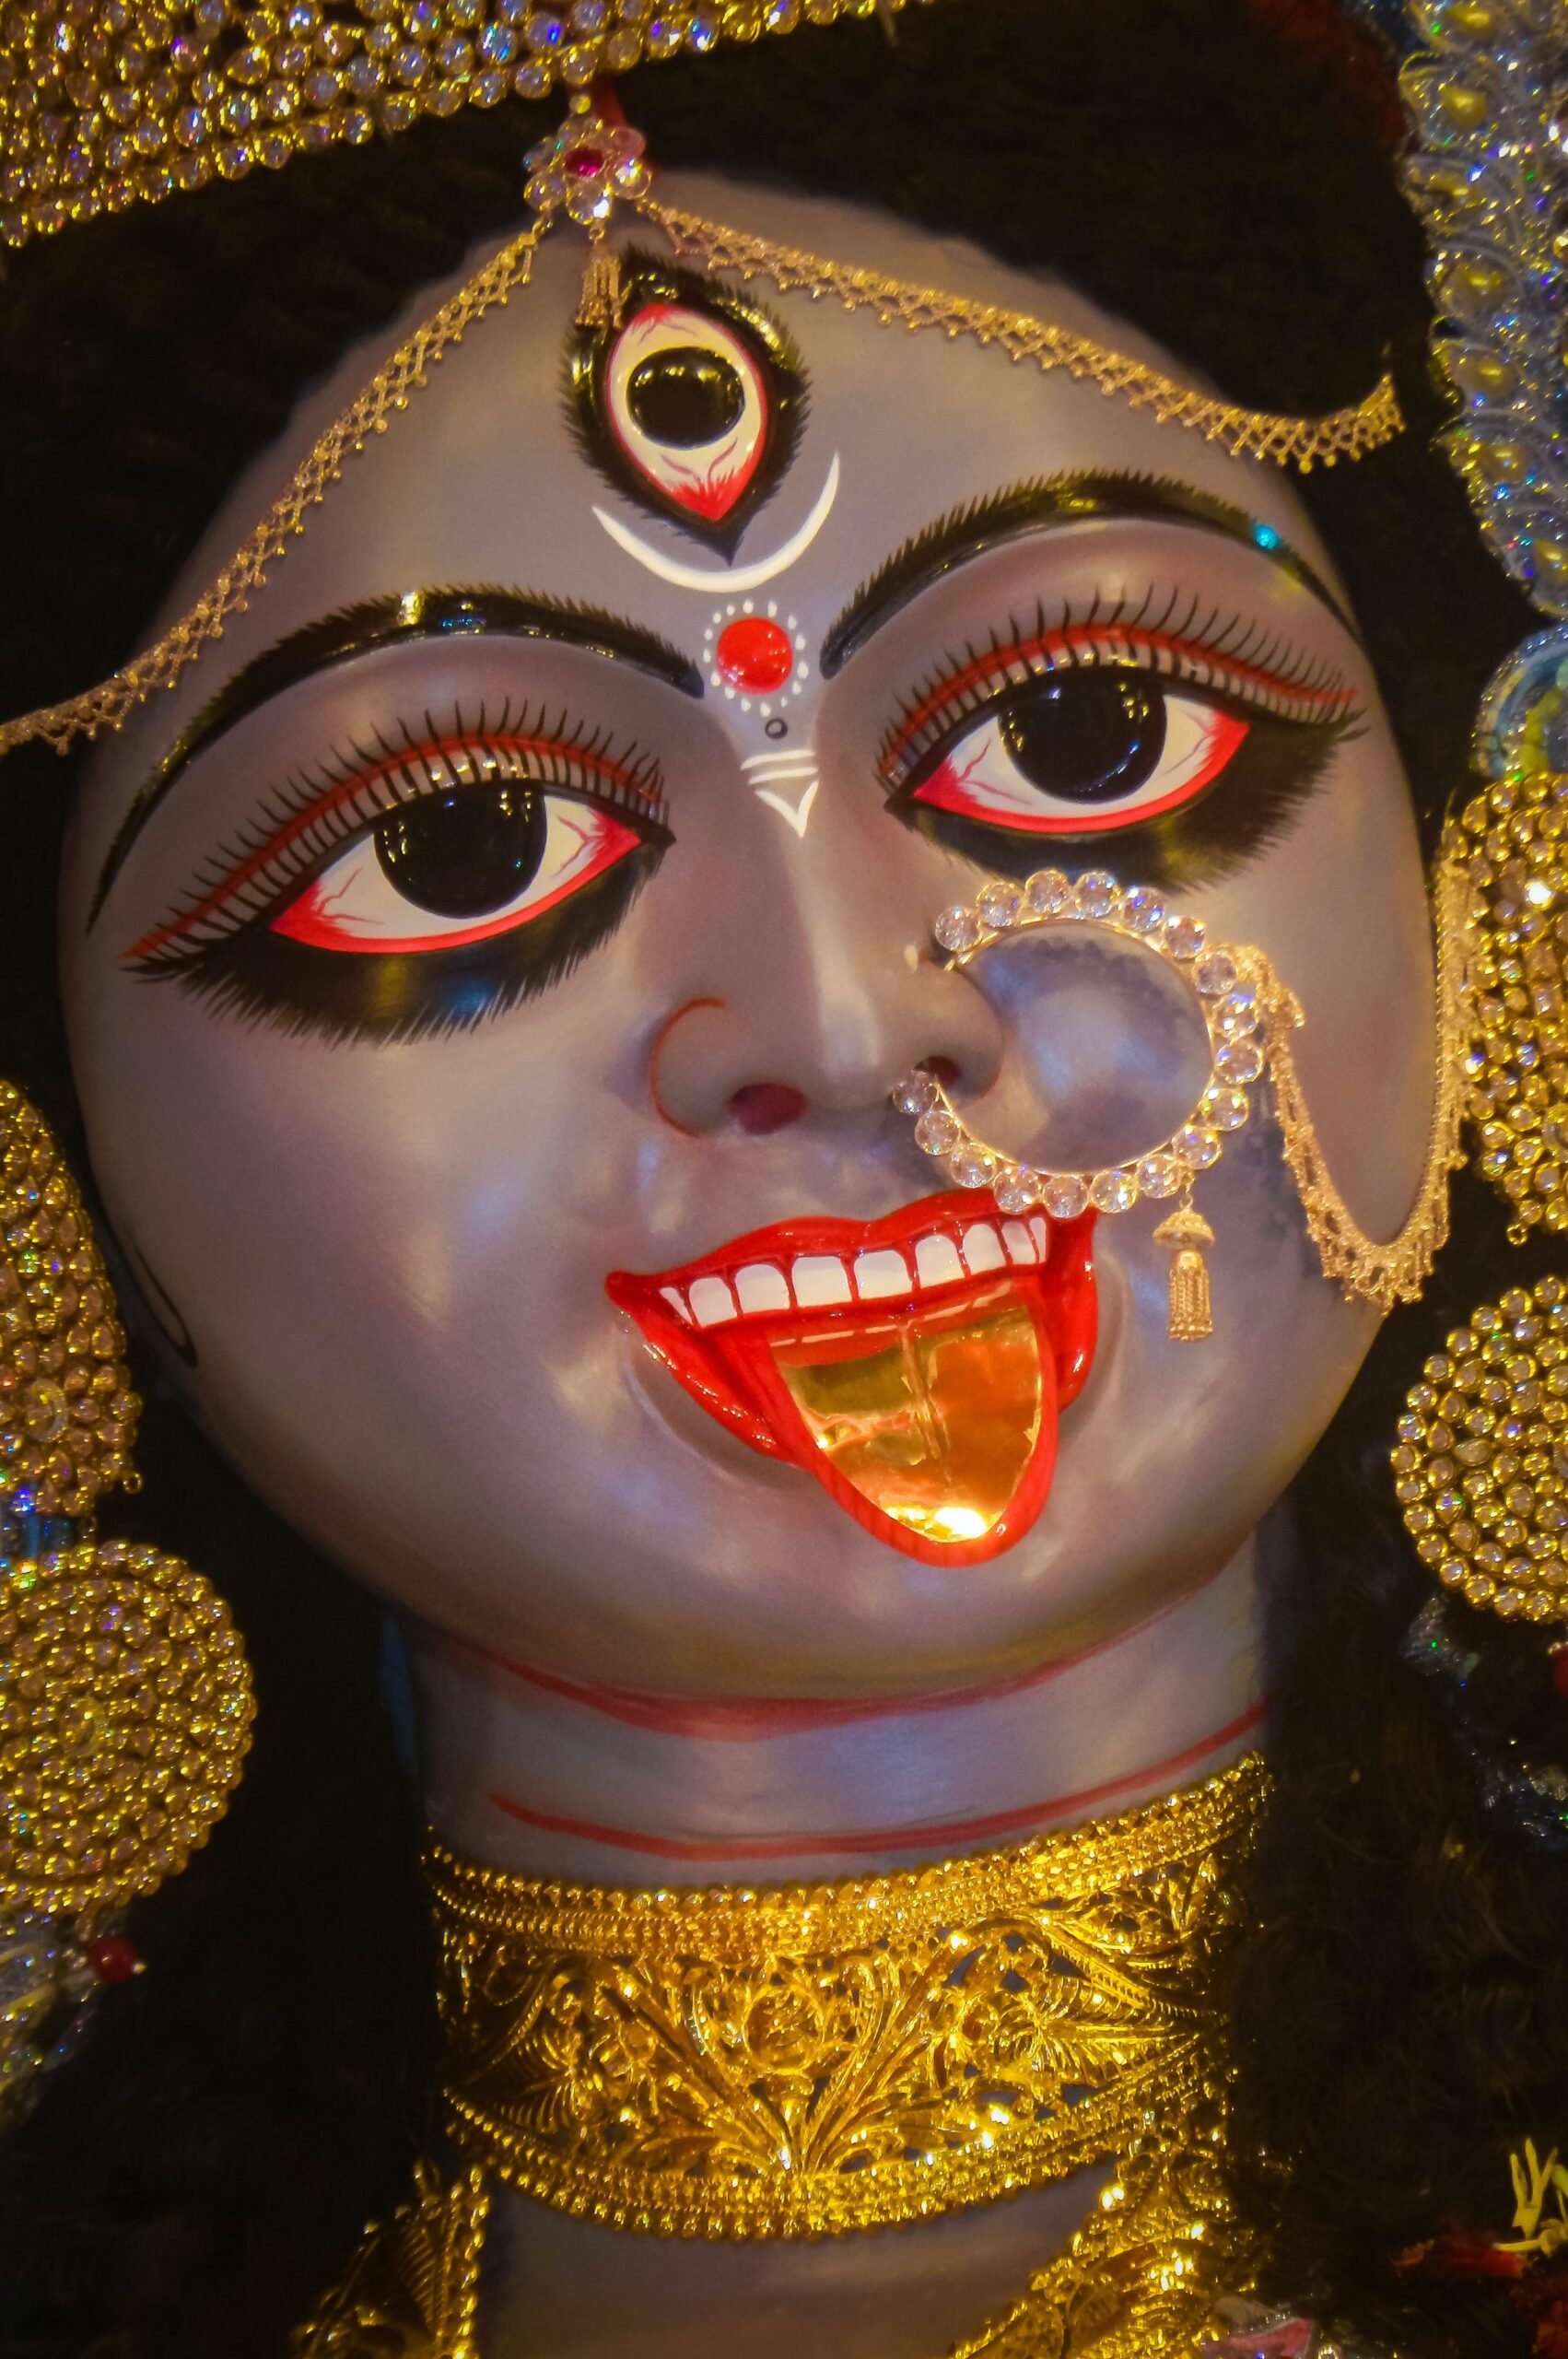 high quality maa kali face wallpaper full size hd